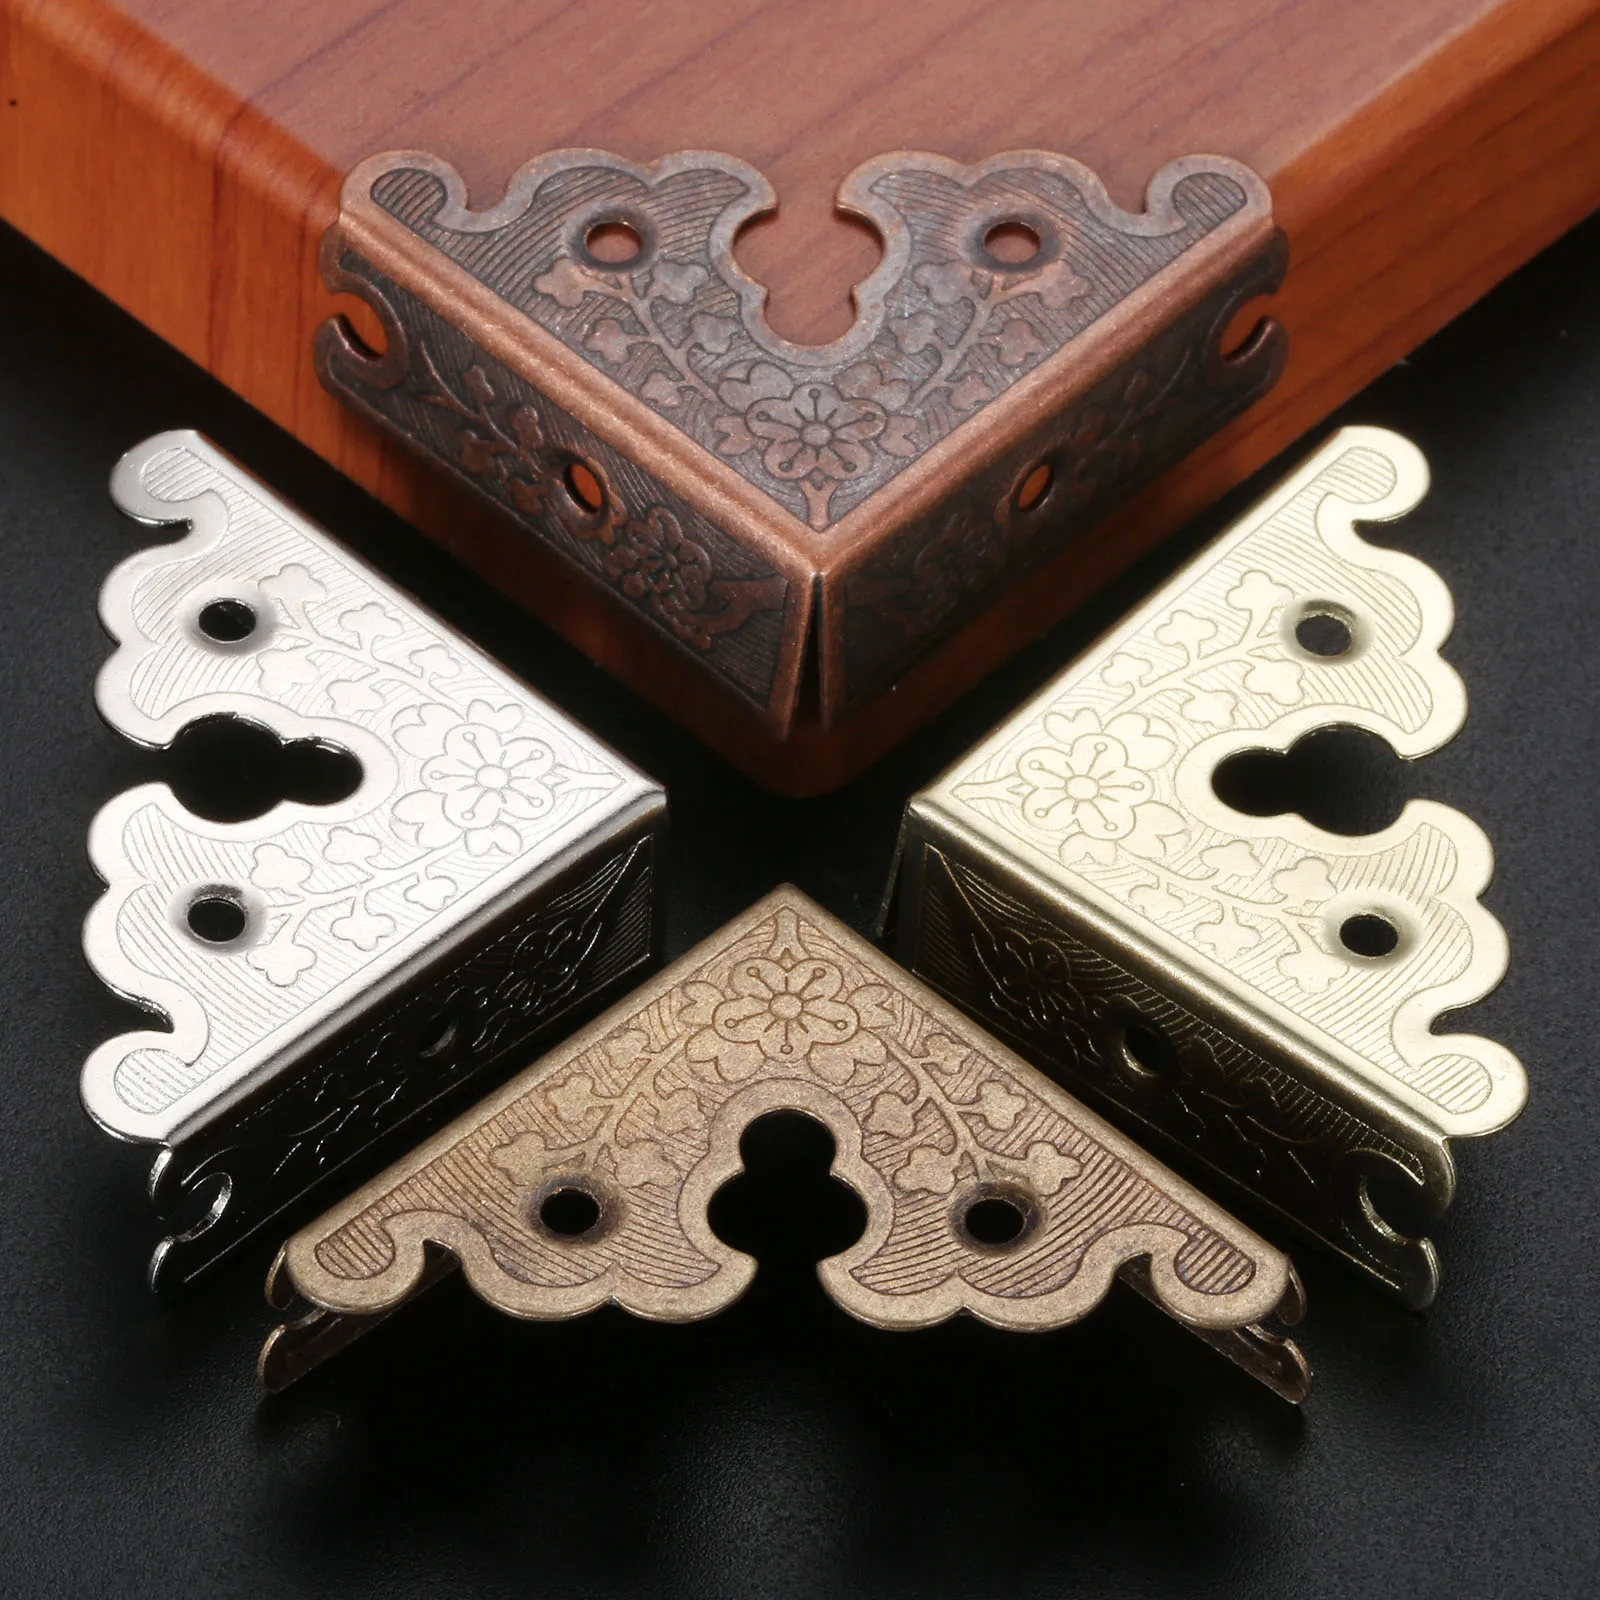 4Pcs 34mm Zinc Alloy Jewelry Wooden Box Triangle Corner Decorative Protectors Furniture Carved Table Corner Brackets Protection